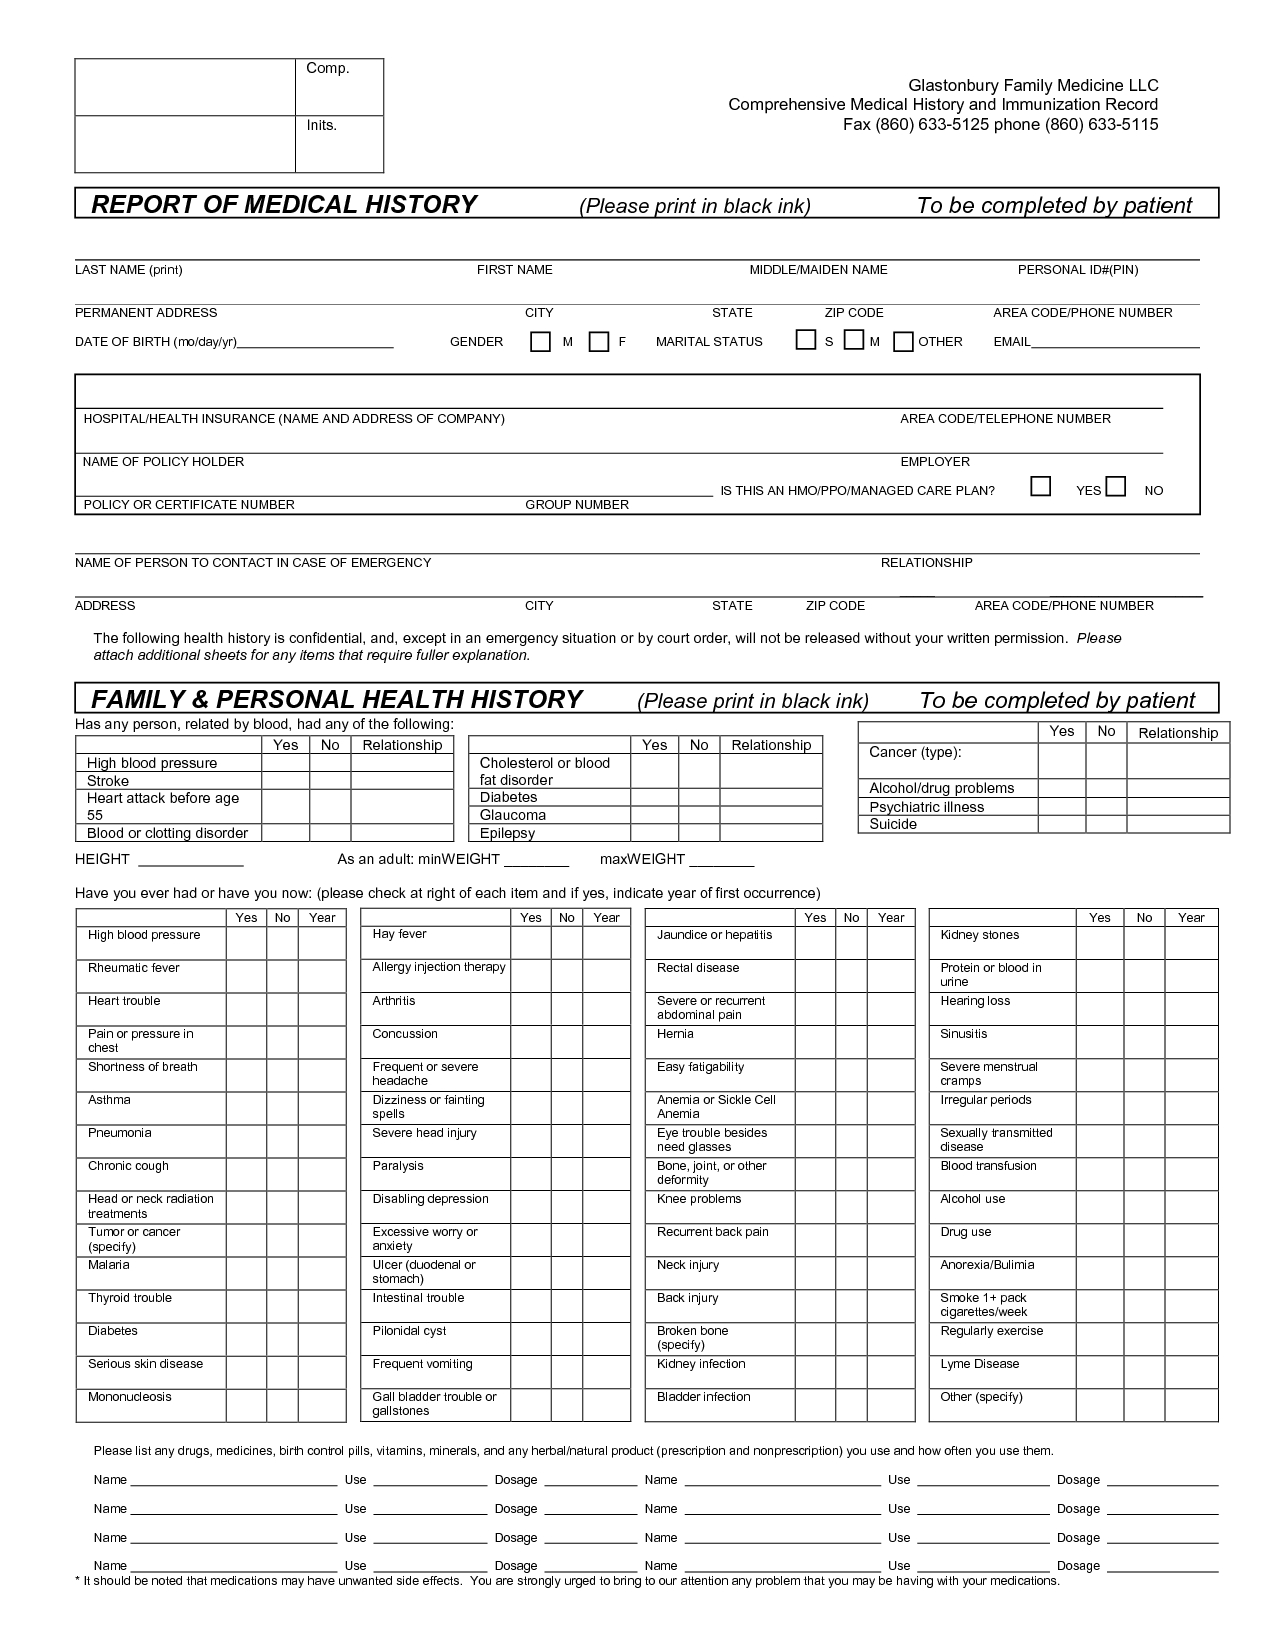 Report Of Medical History Family Personal Health History | Genealogy - Free Printable Medical History Forms